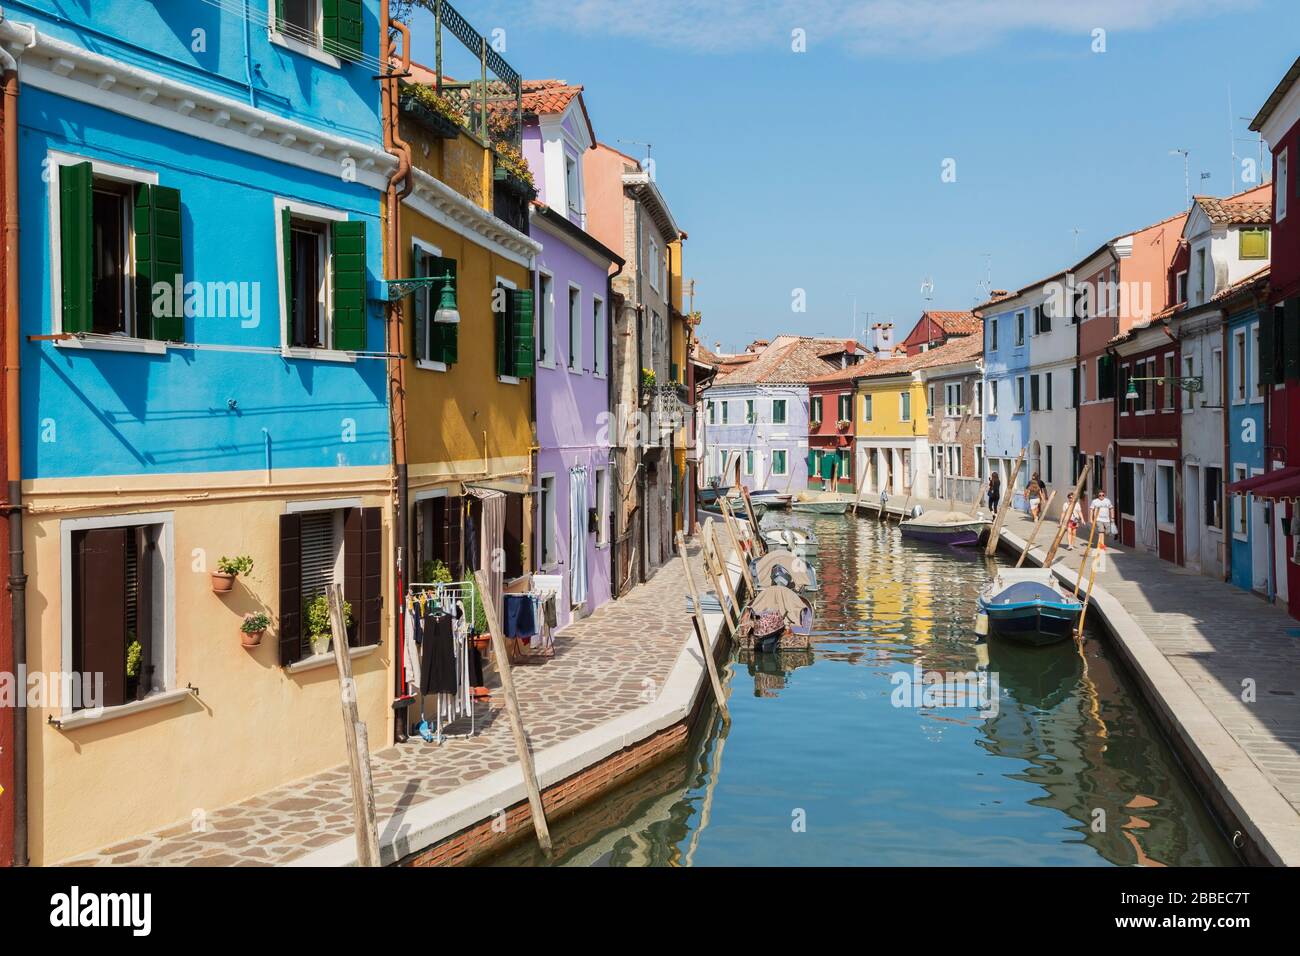 Moored boats on canal lined with colourful houses and shop, Burano Island, Venetian Lagoon, Venice, Veneto, Italy Stock Photo